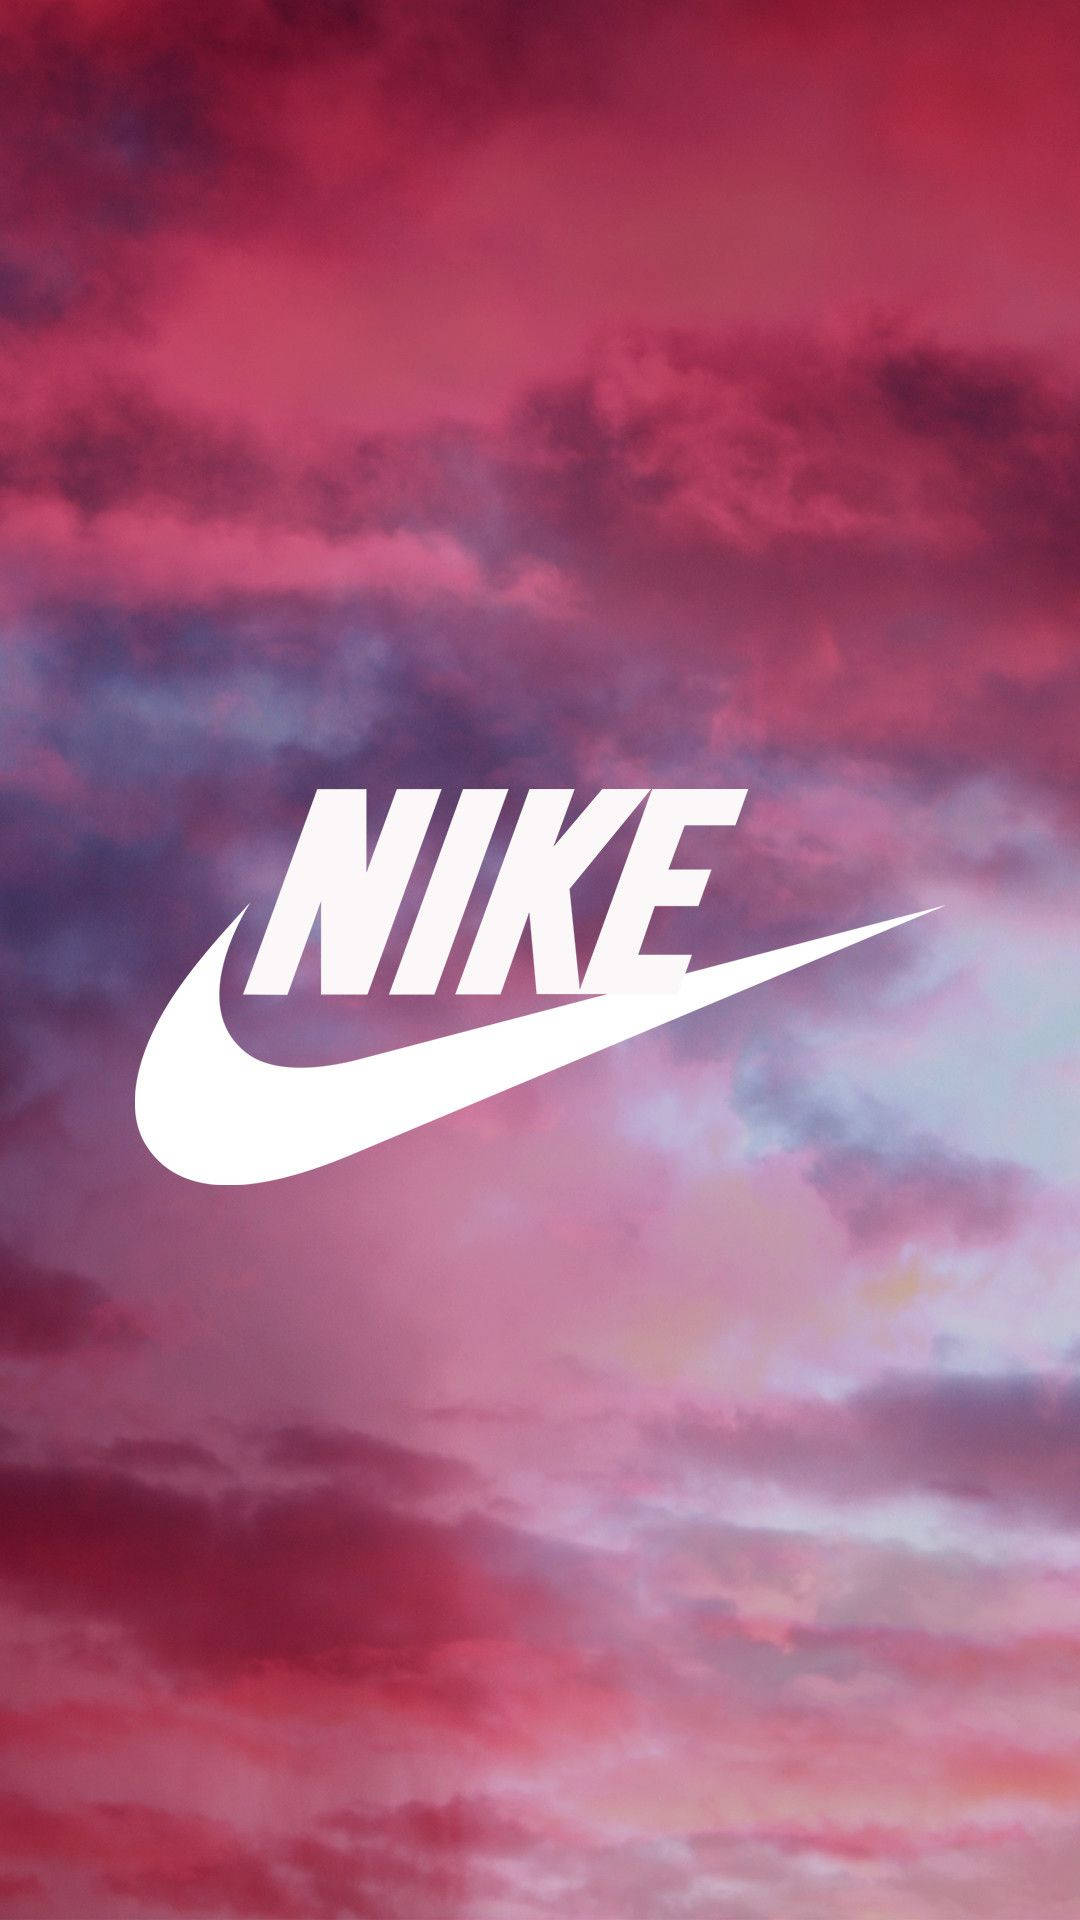 Nike 1080X1920 Wallpaper and Background Image